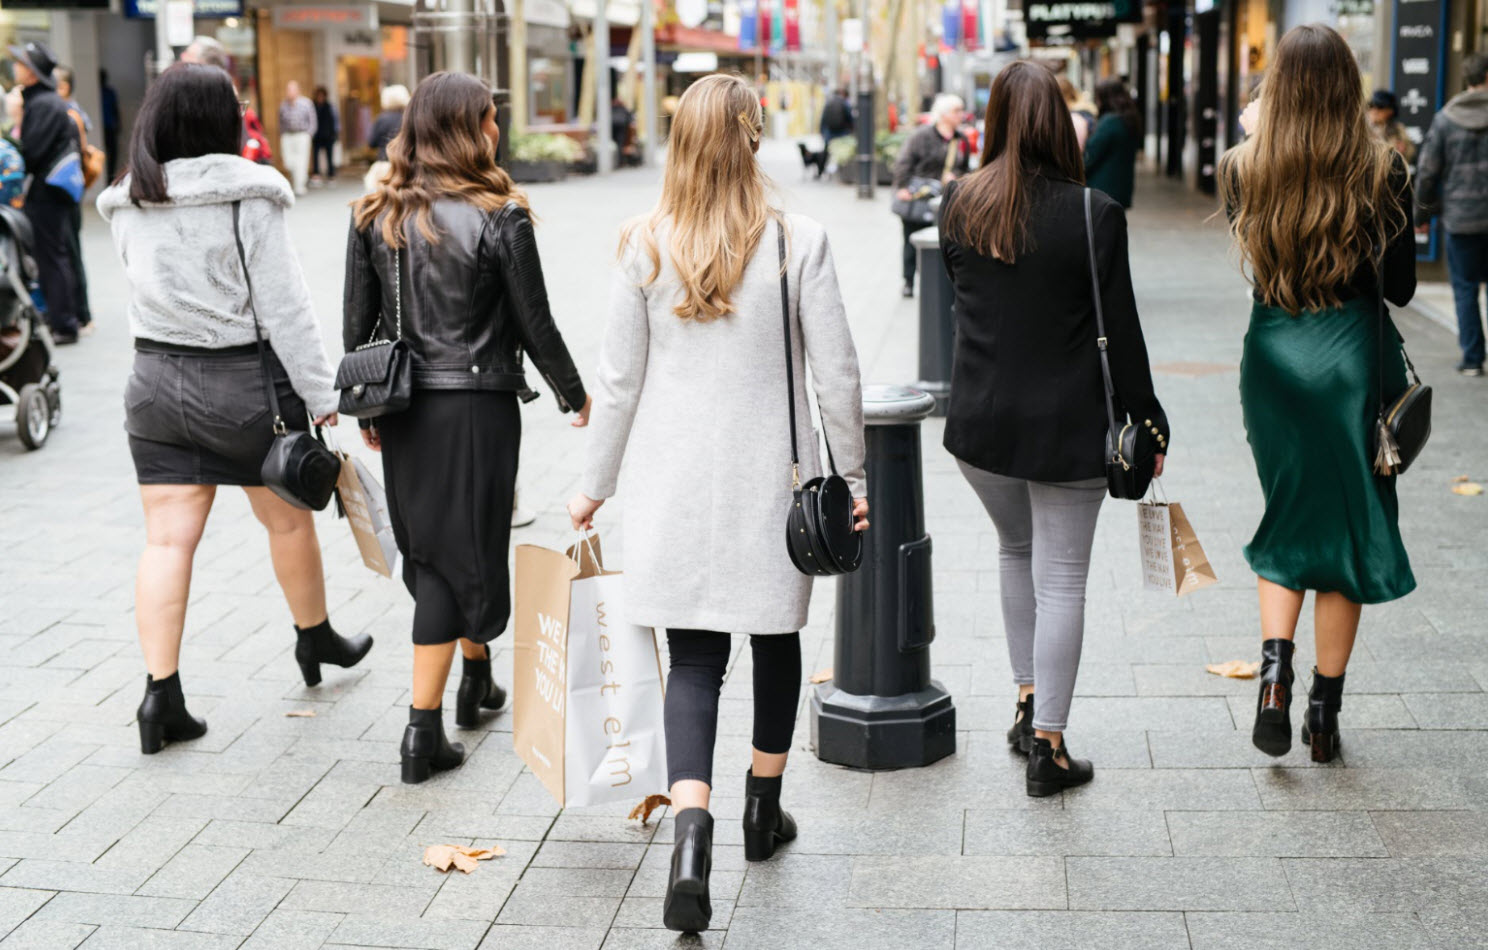 Group of girls with shopping bags